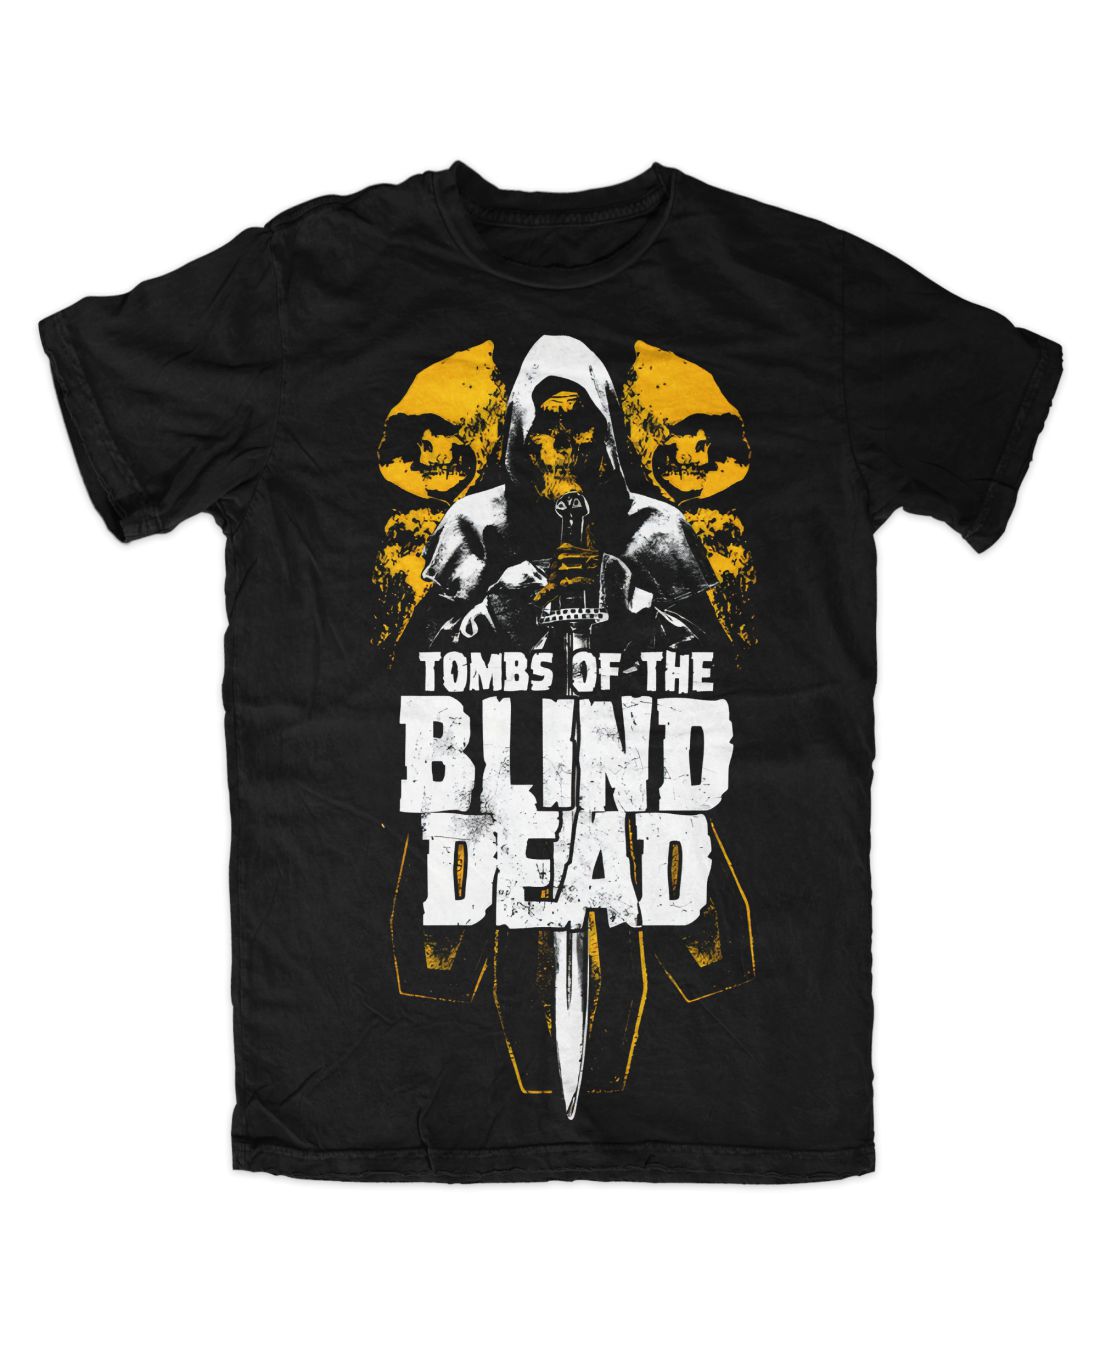 Tombs Of The Blind Dead 001